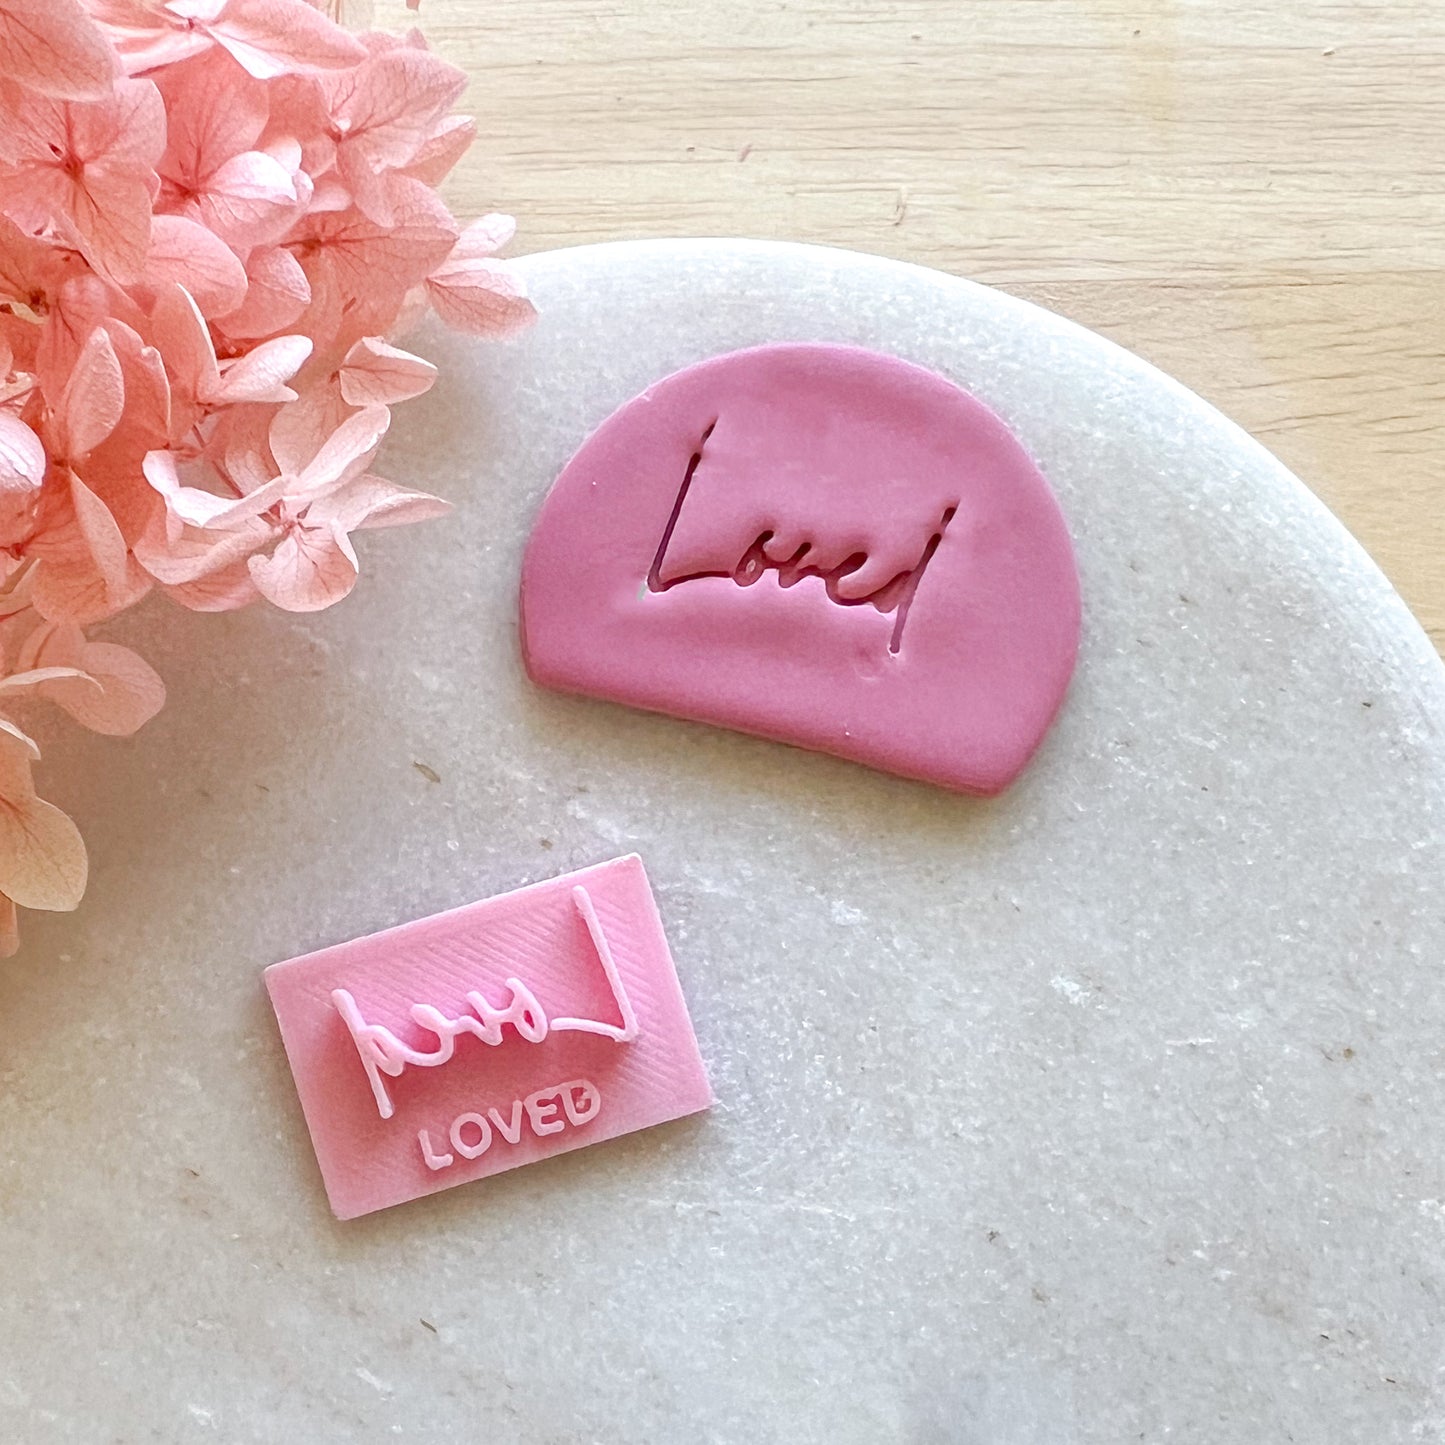 Loved - Occasion Stamp